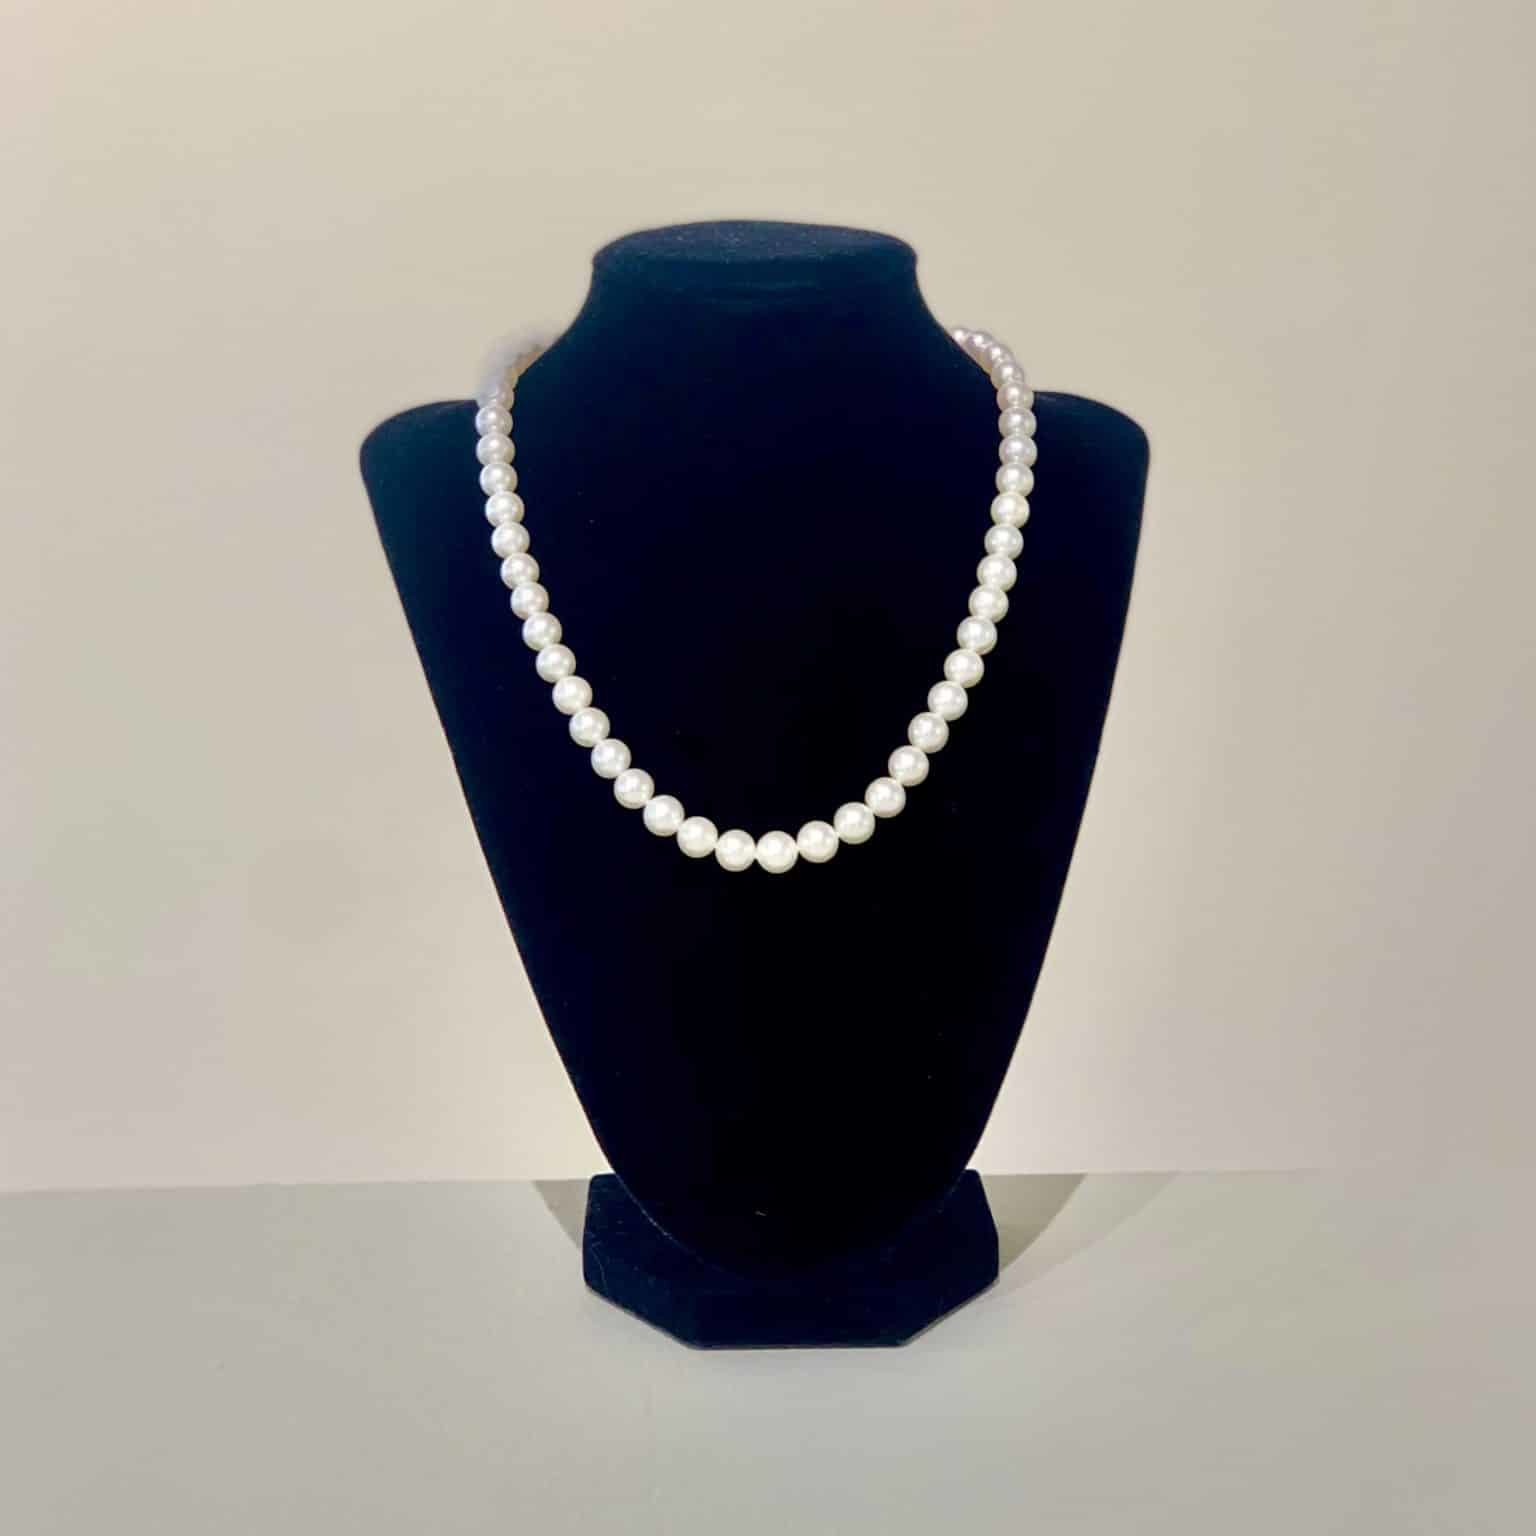 A beautiful freshwater pearl necklace generously donated by Provident Jewelry